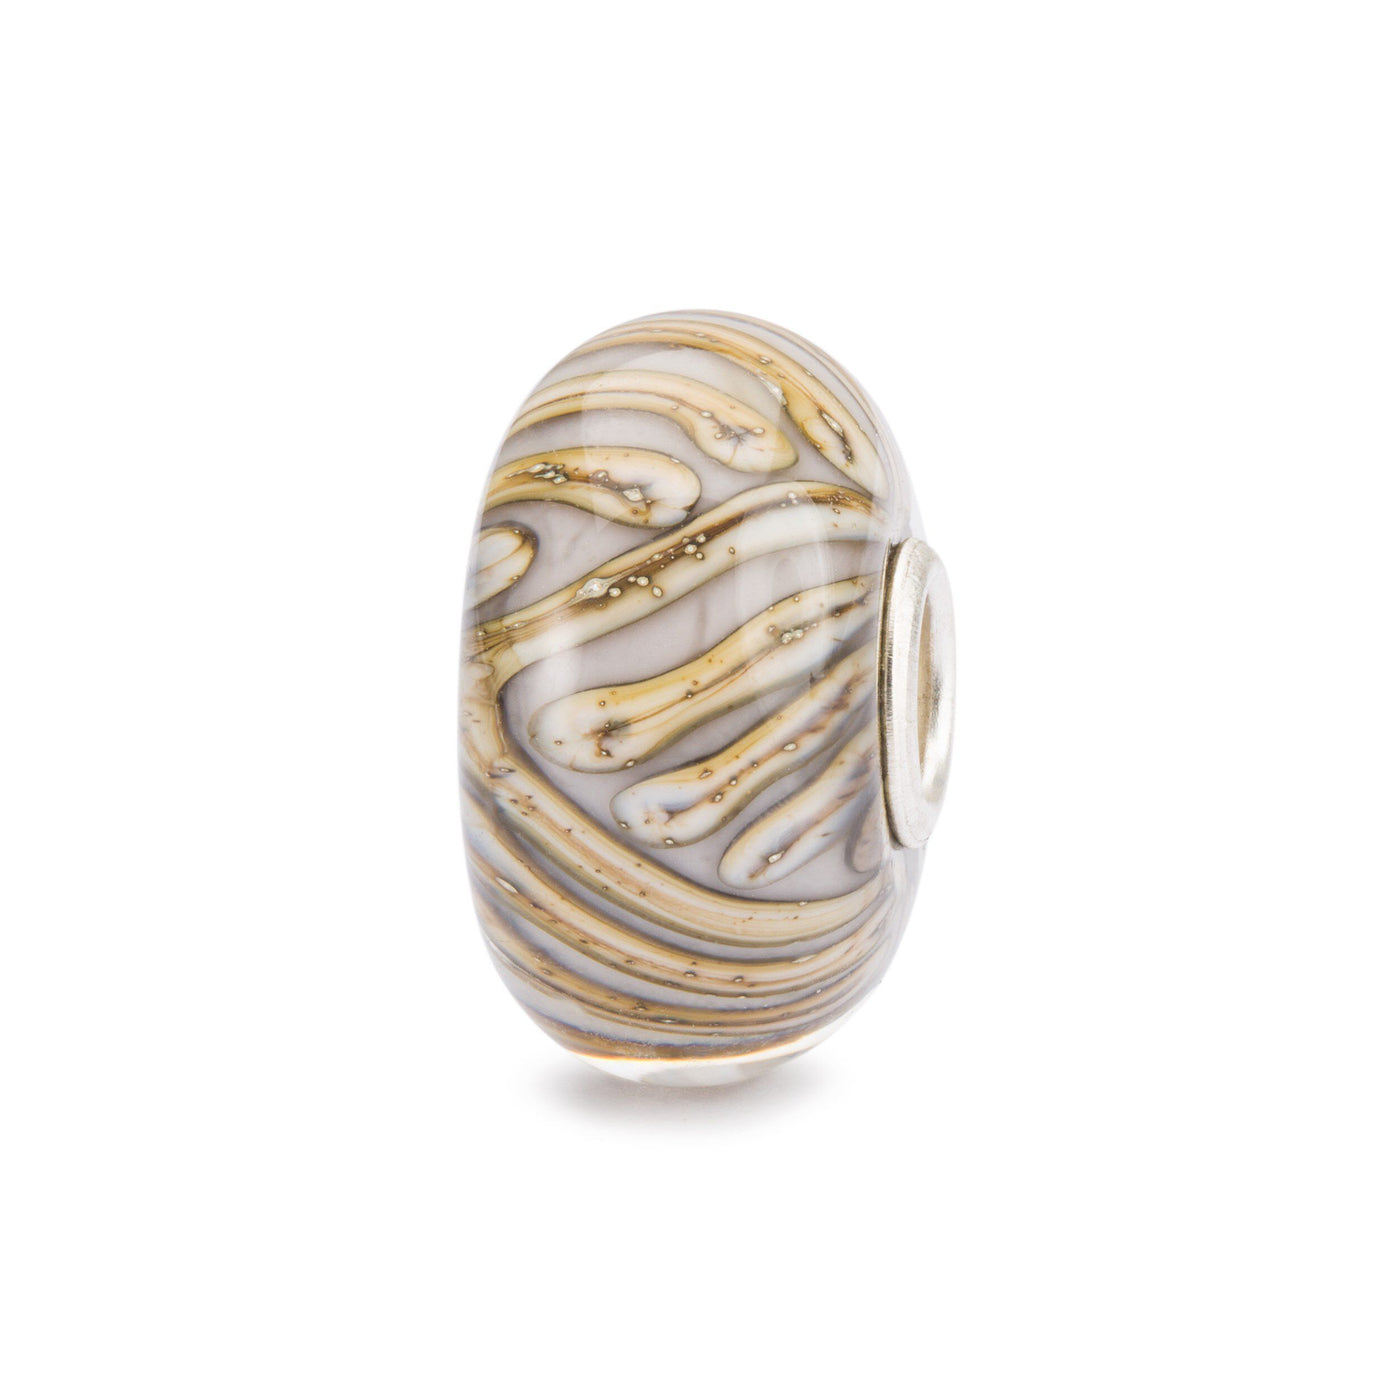 Willow - Trollbeads Canada